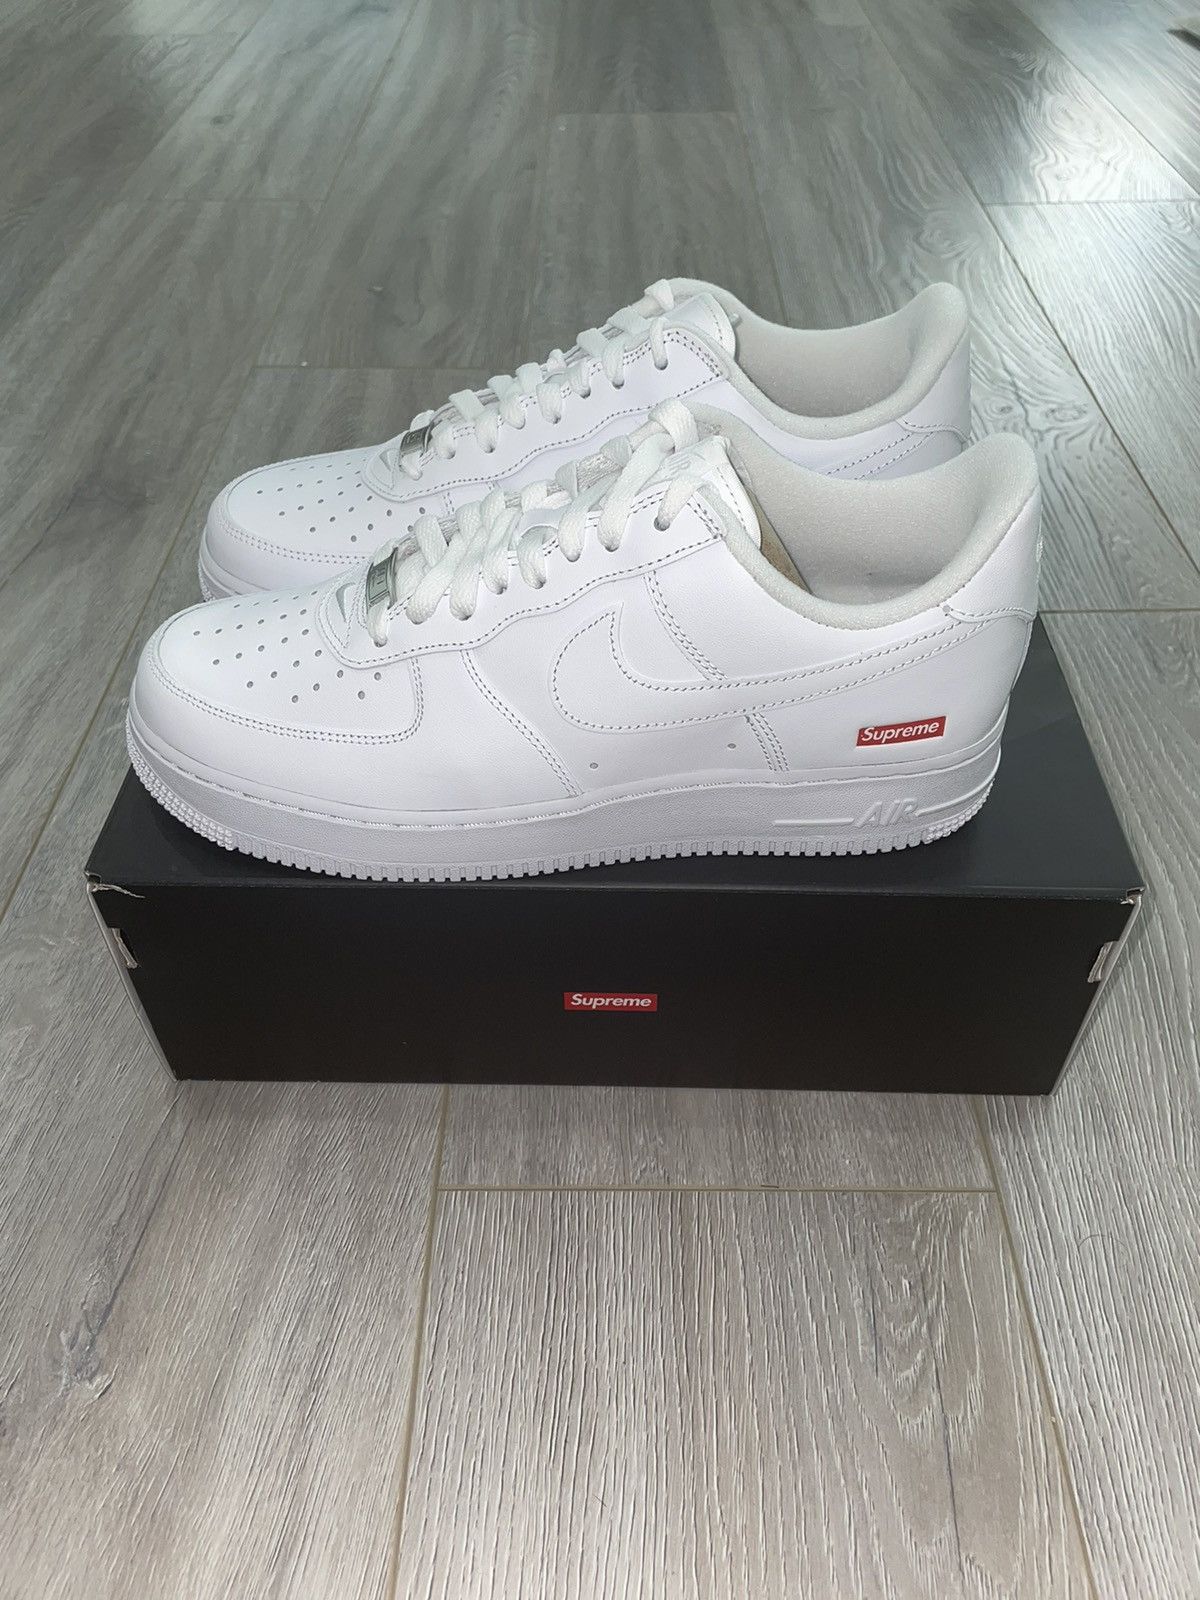 Pre-owned Nike X Supreme White Air Force 1 Shoes